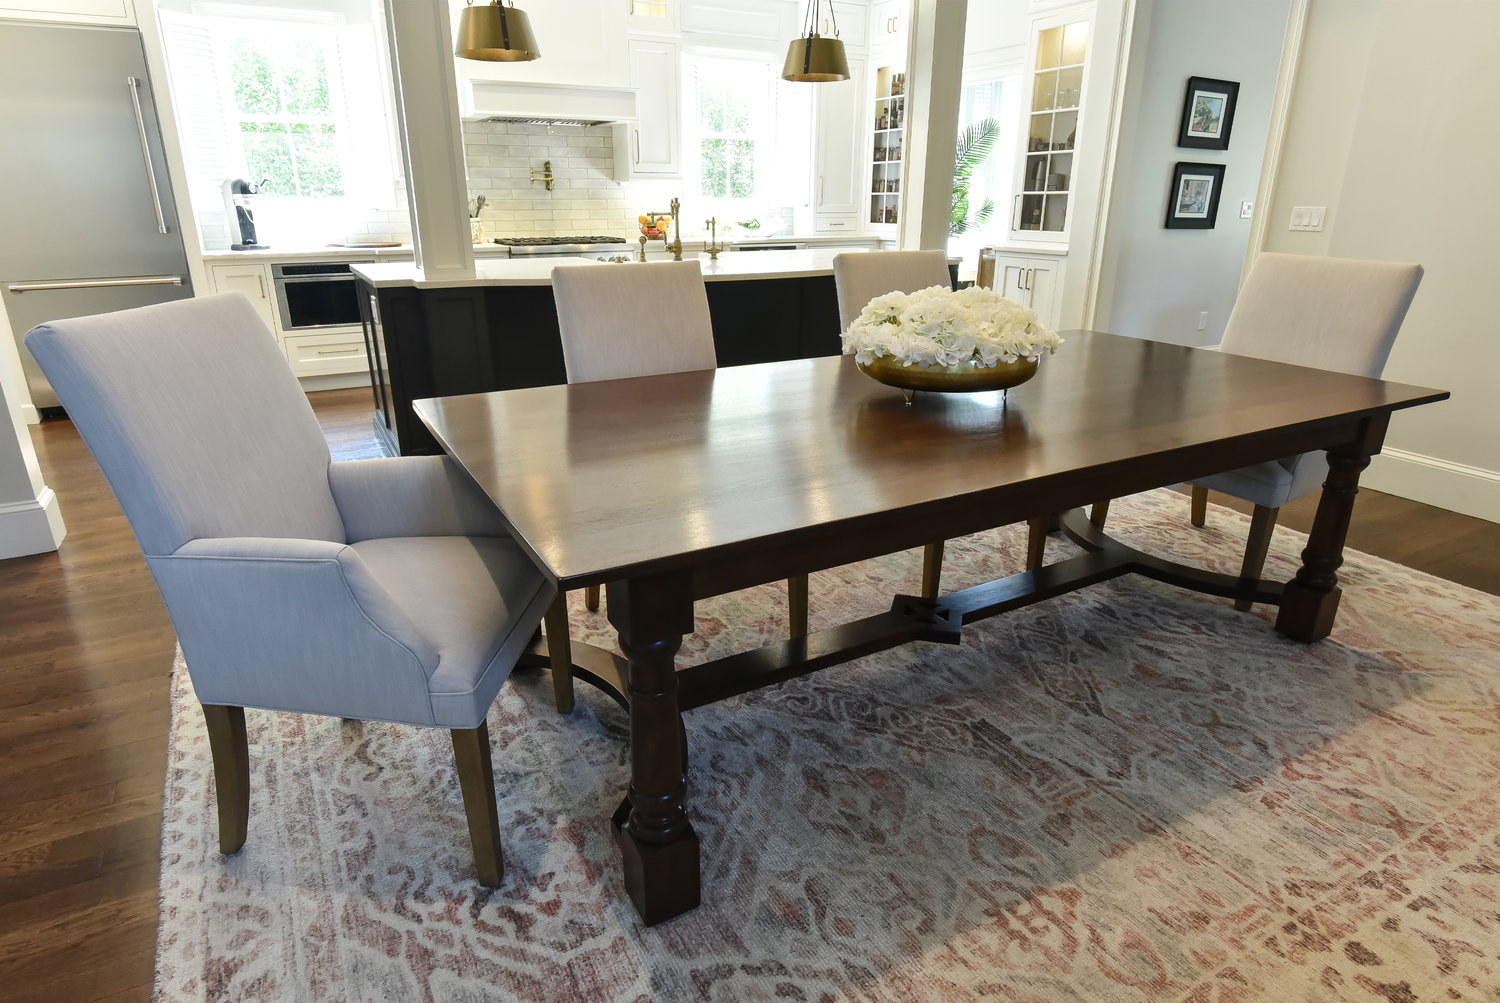 The walnut dining table was a design collaboration between Inside Style, their clients, and Matt Johnson, artisan/craftsman